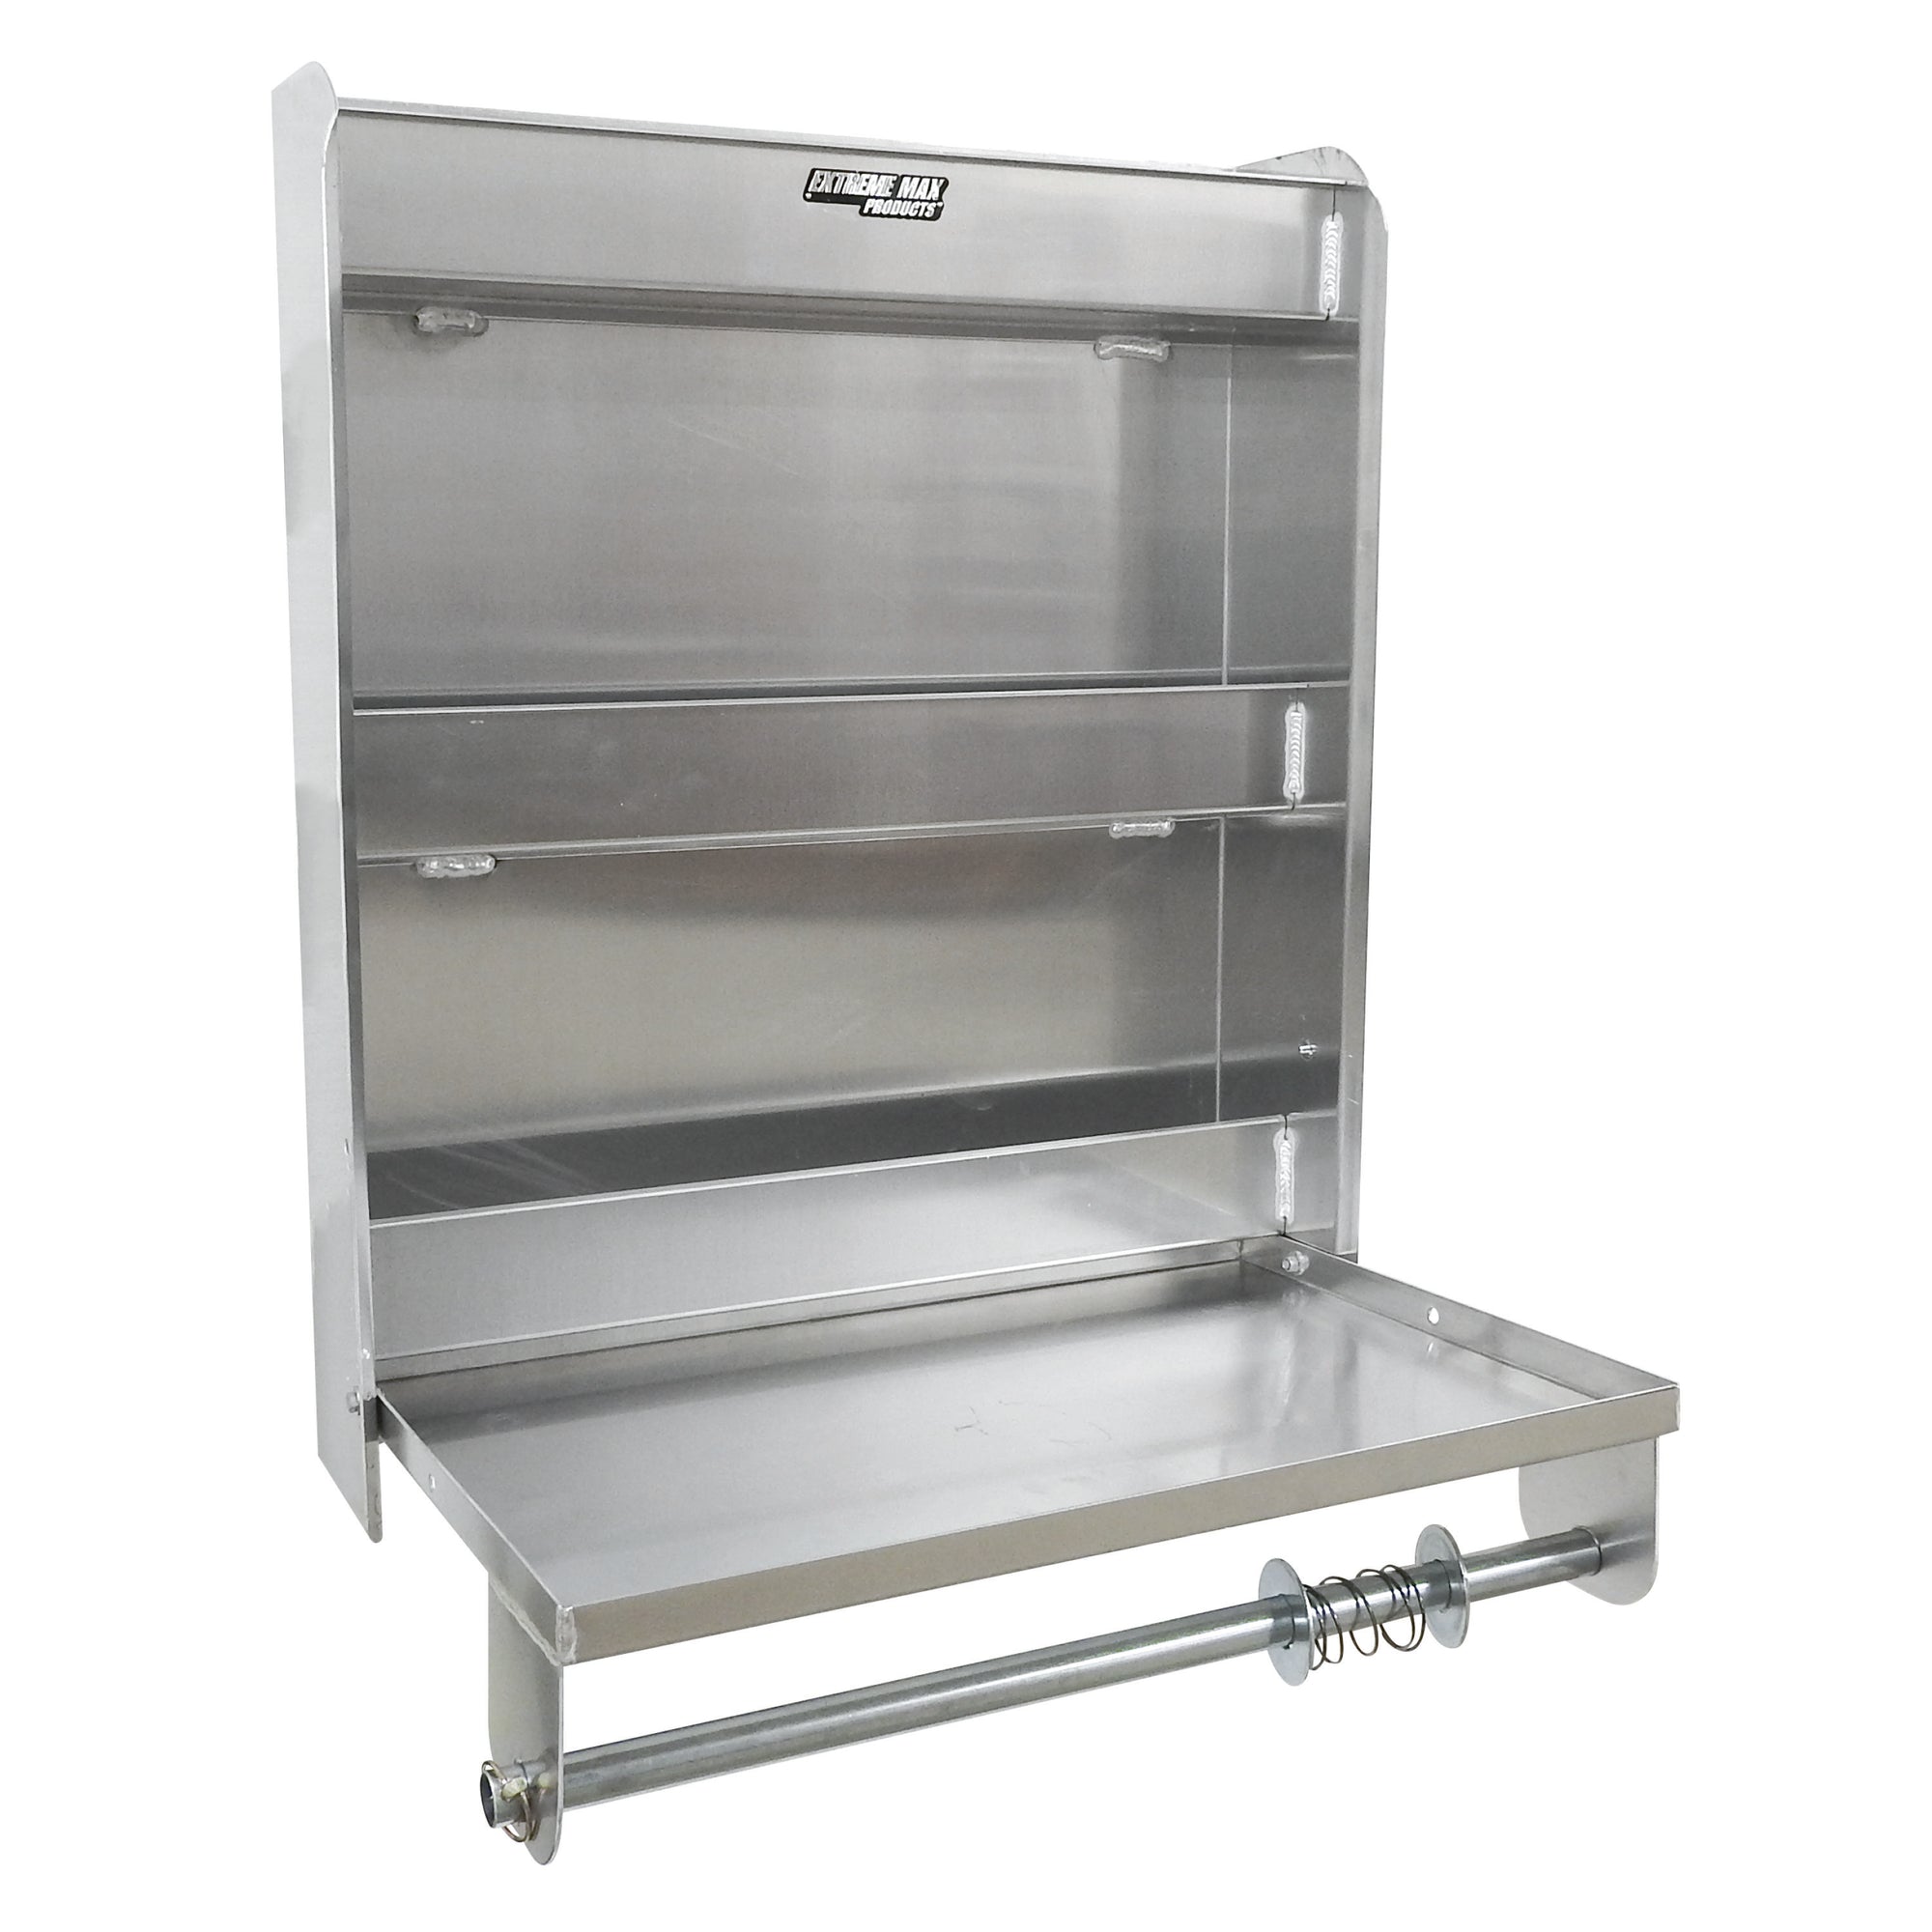 Extreme Max 5001.6049 Aluminum Work Station Storage Cabinet w/ Flip-Out Work Tray & Paper Towel Rack Organizer for Enclosed Race Trailer, Shop, Garage, Storage - Silver